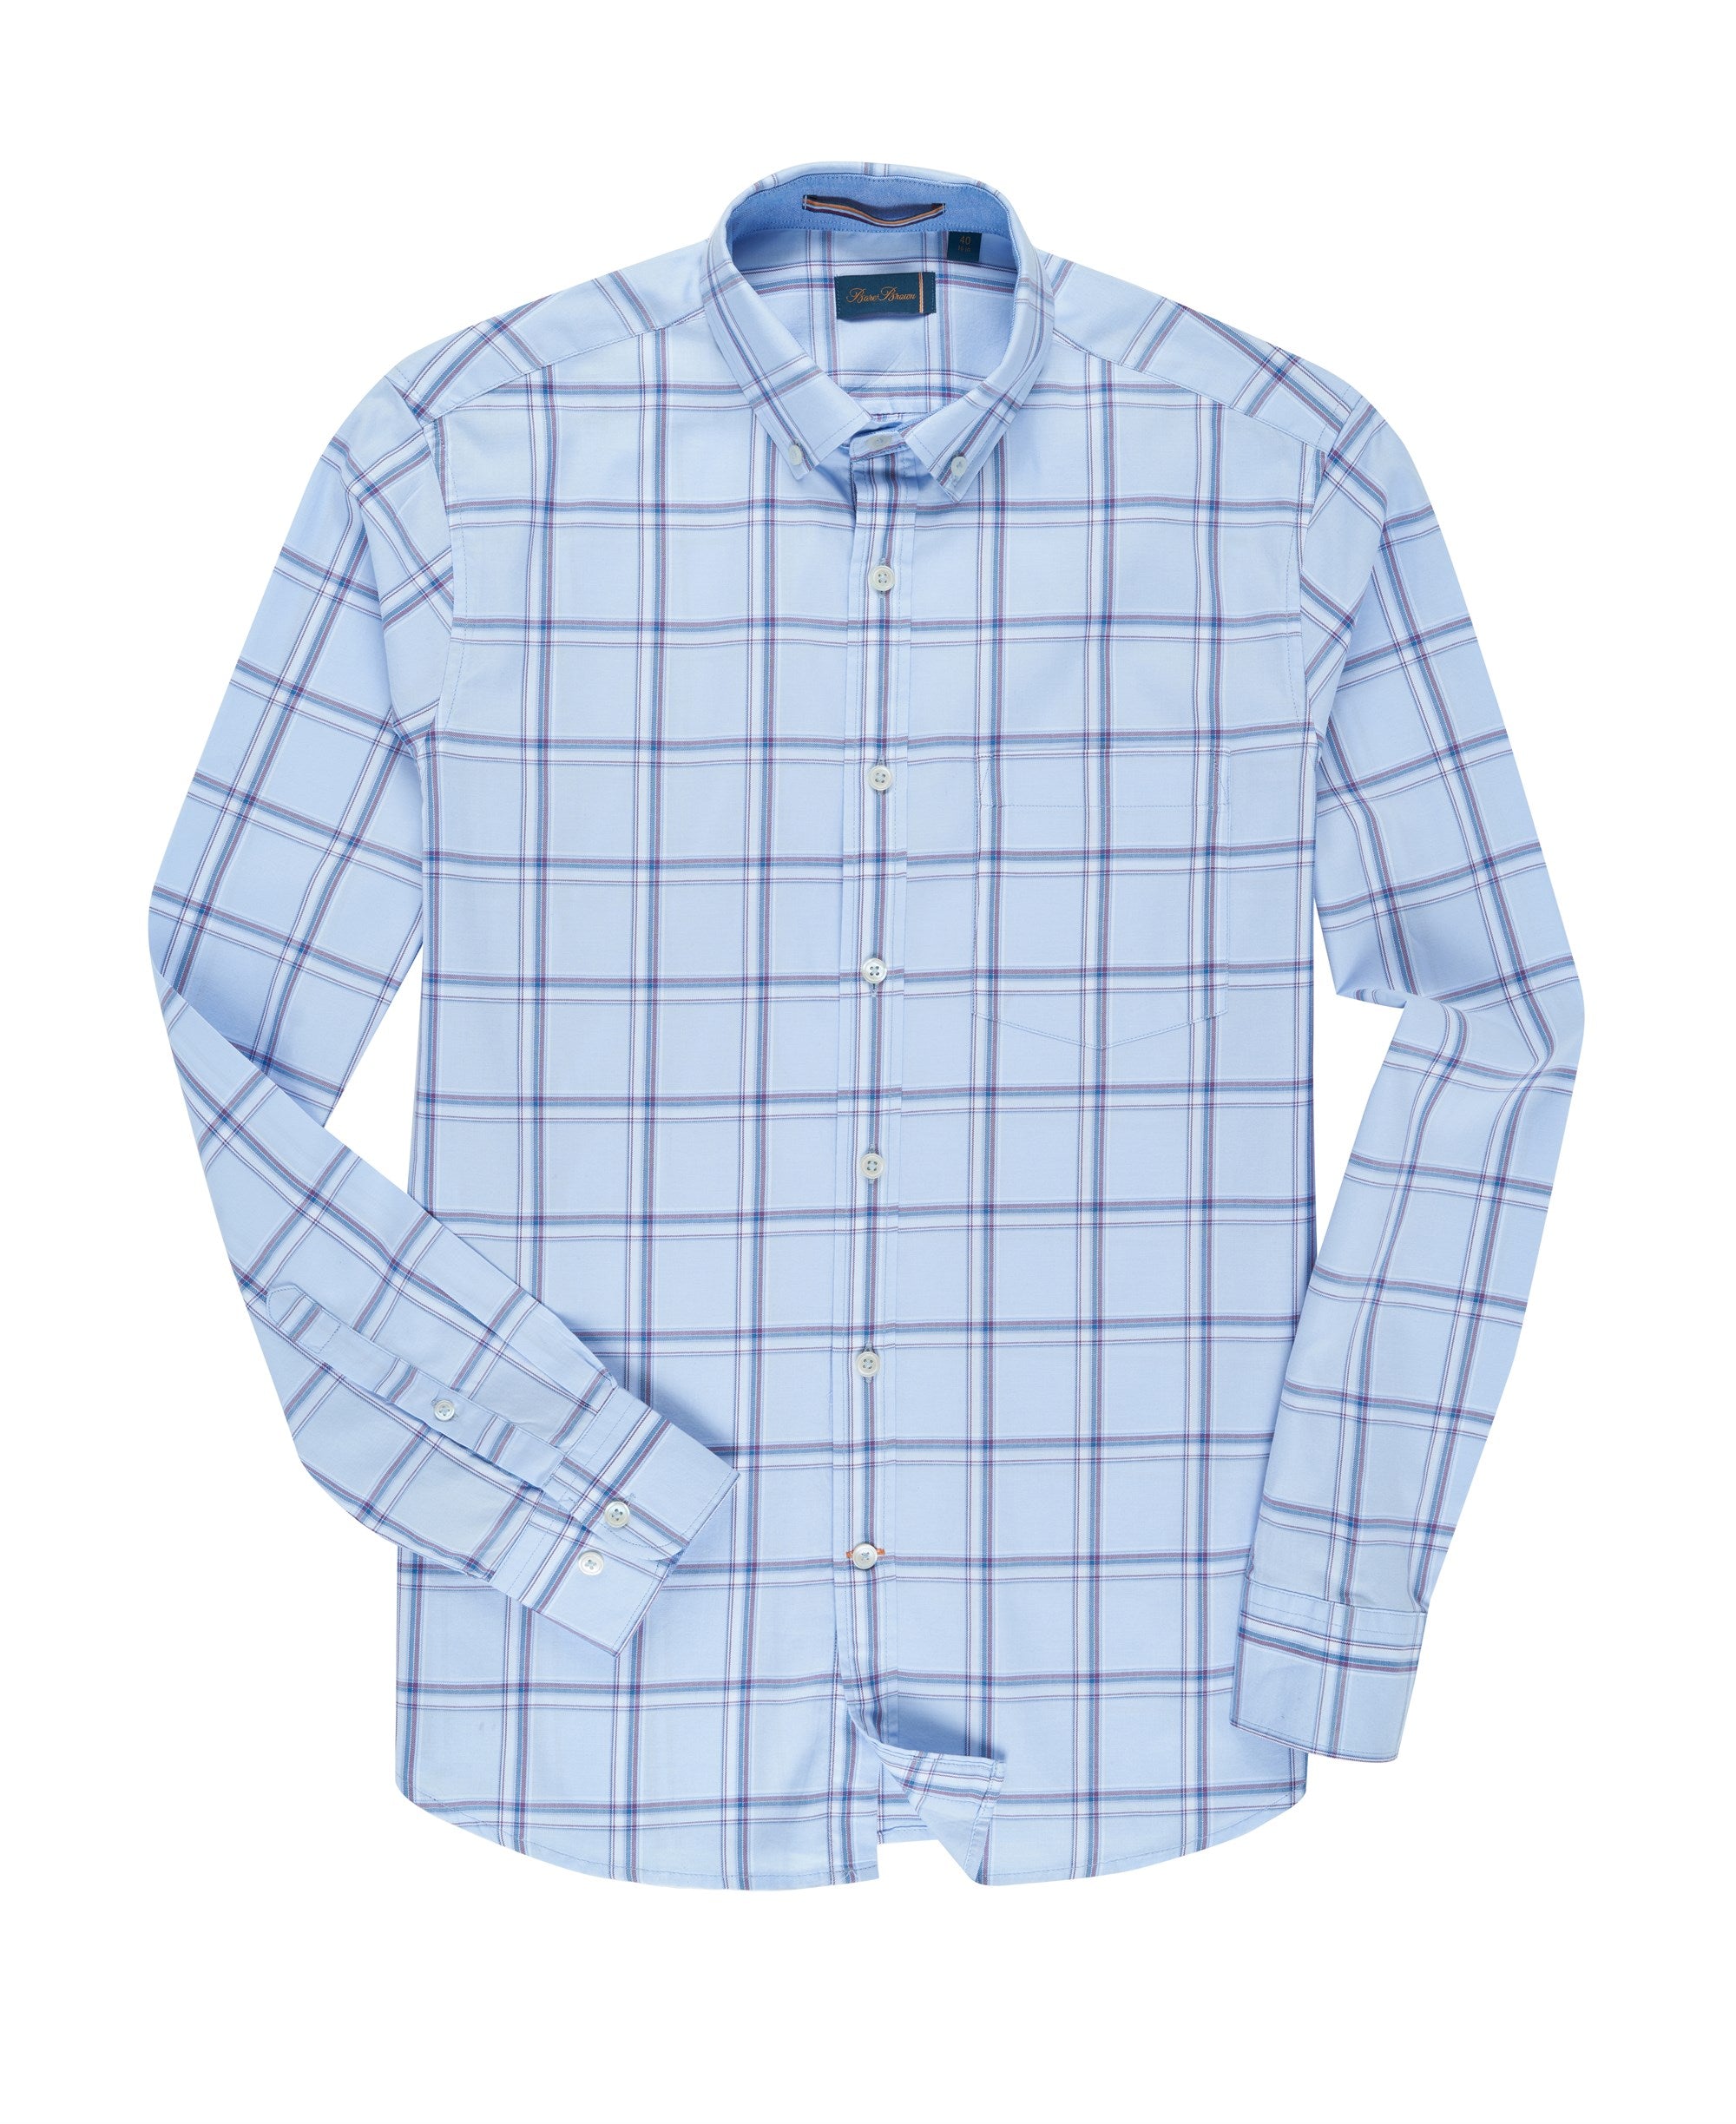 Bare Brown Buttondown Collar Cotton Checked Shirt, Slim Fit with Full Sleeves - Sky Blue